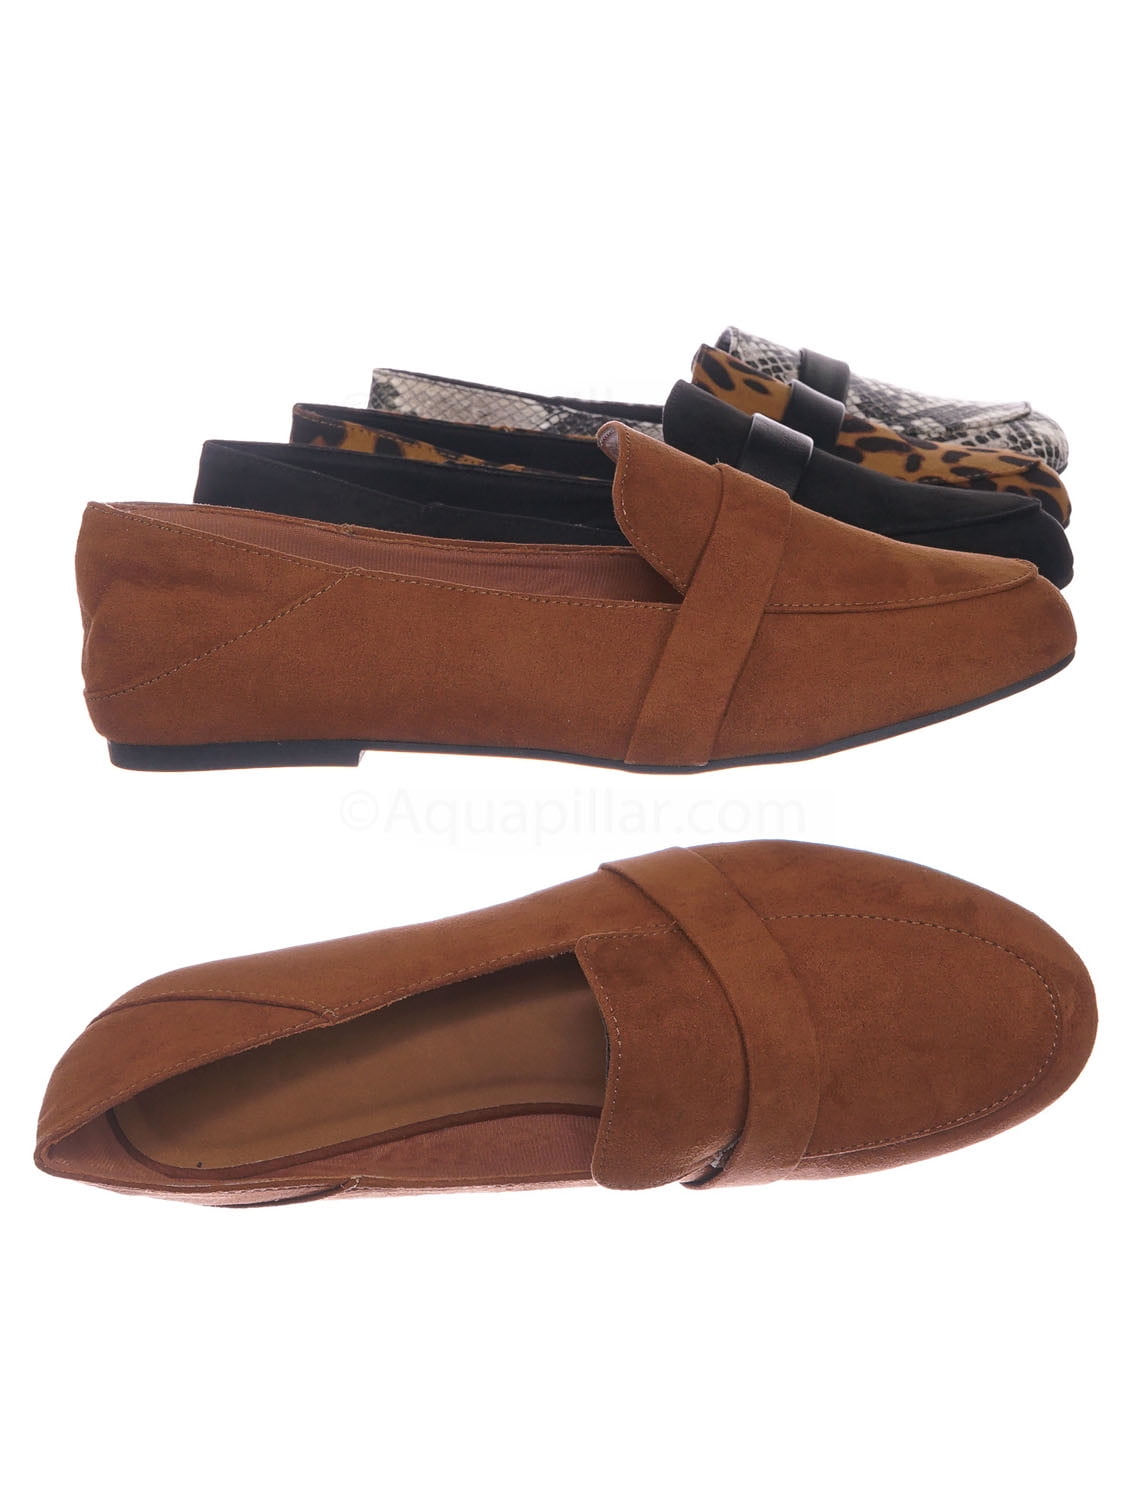 Jackpot27 by Bamboo, Lightweight Round Toe Loafer - Women Classic ...